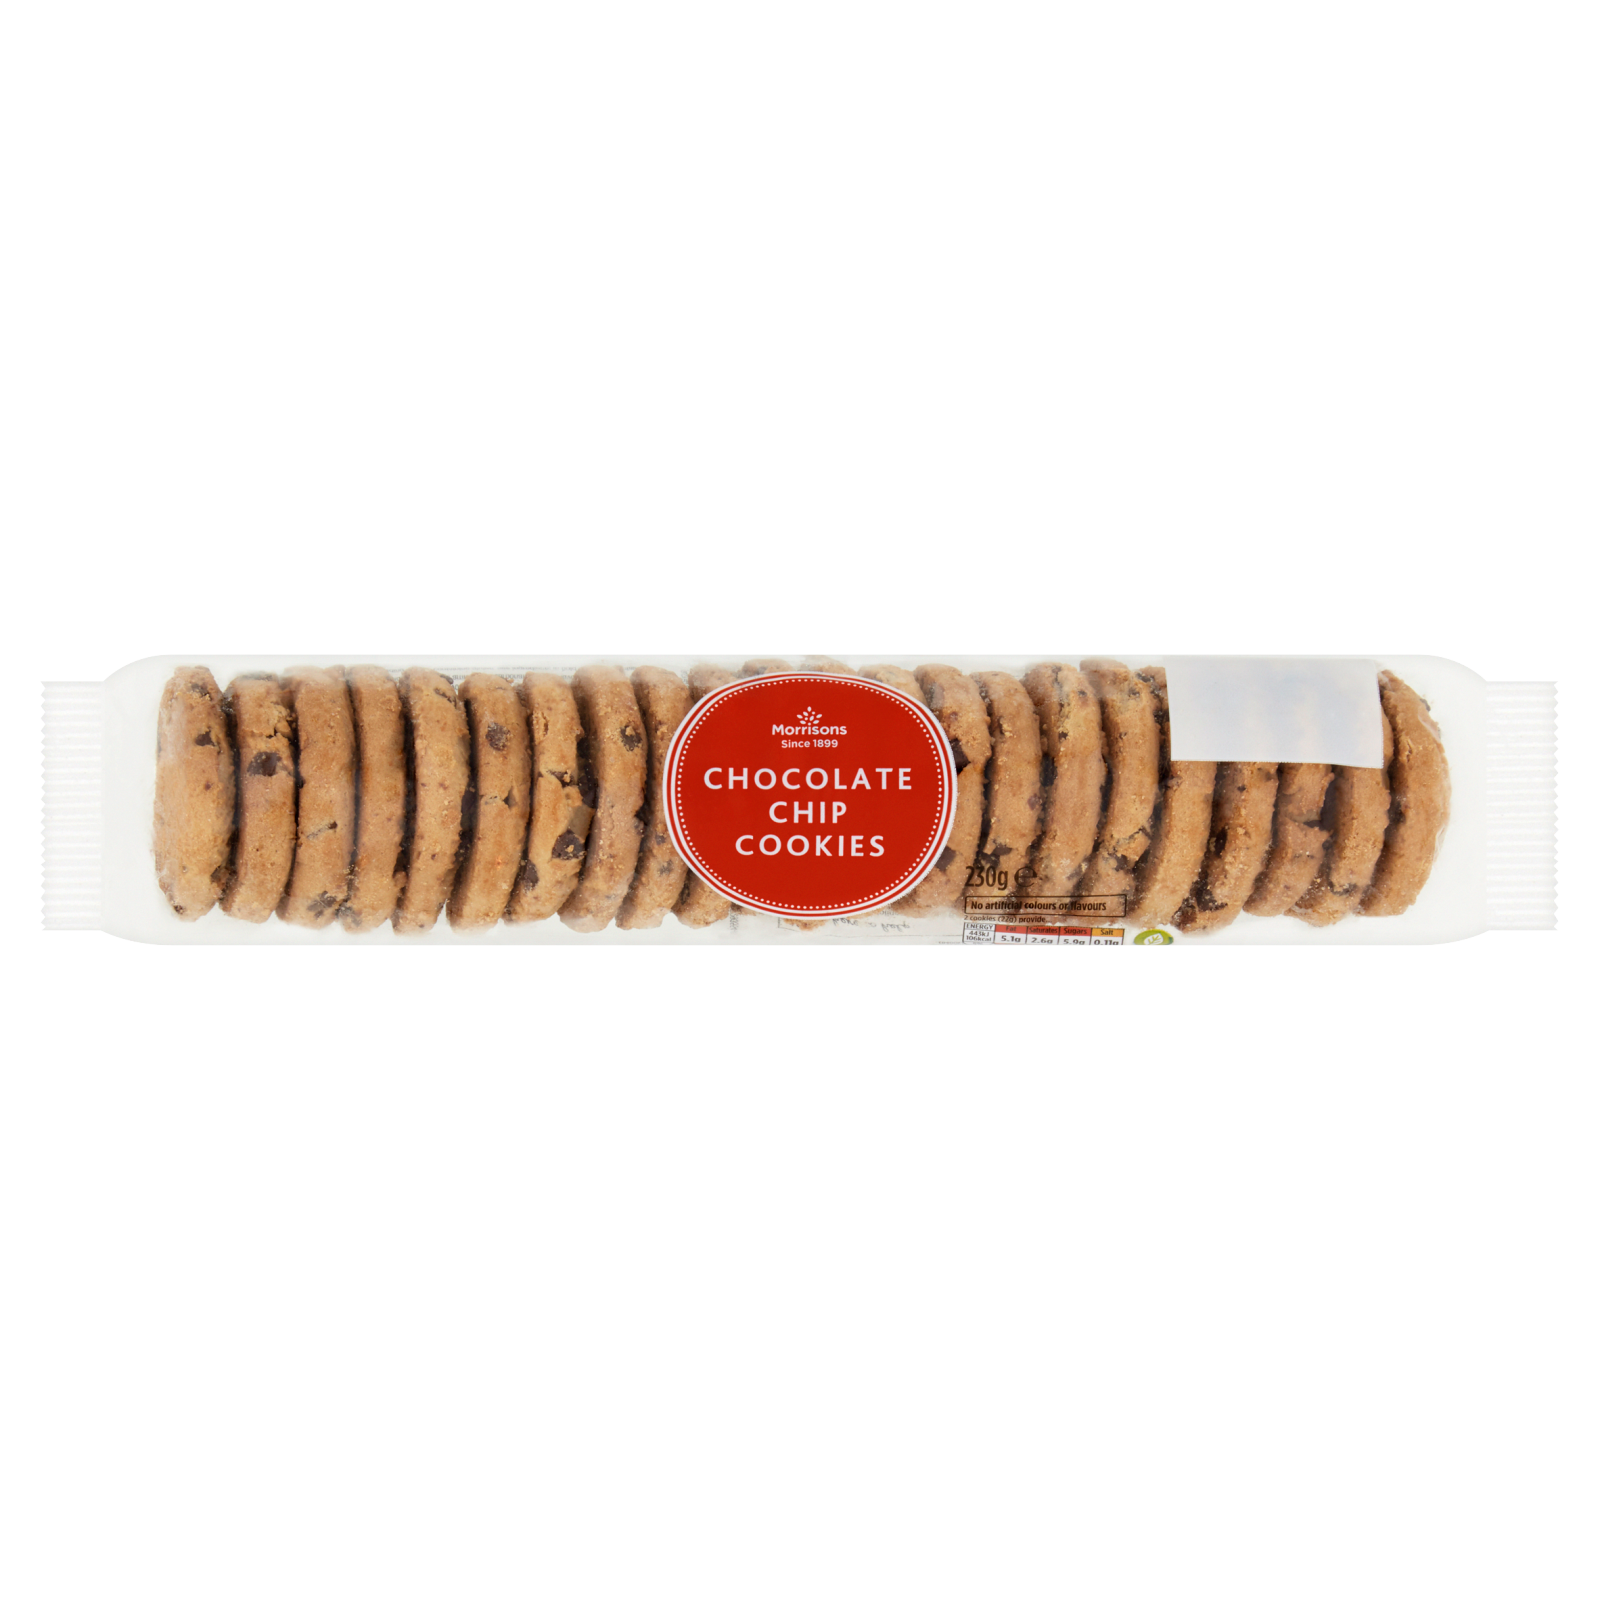 Morrisons Choc Chip Cookie, 230g